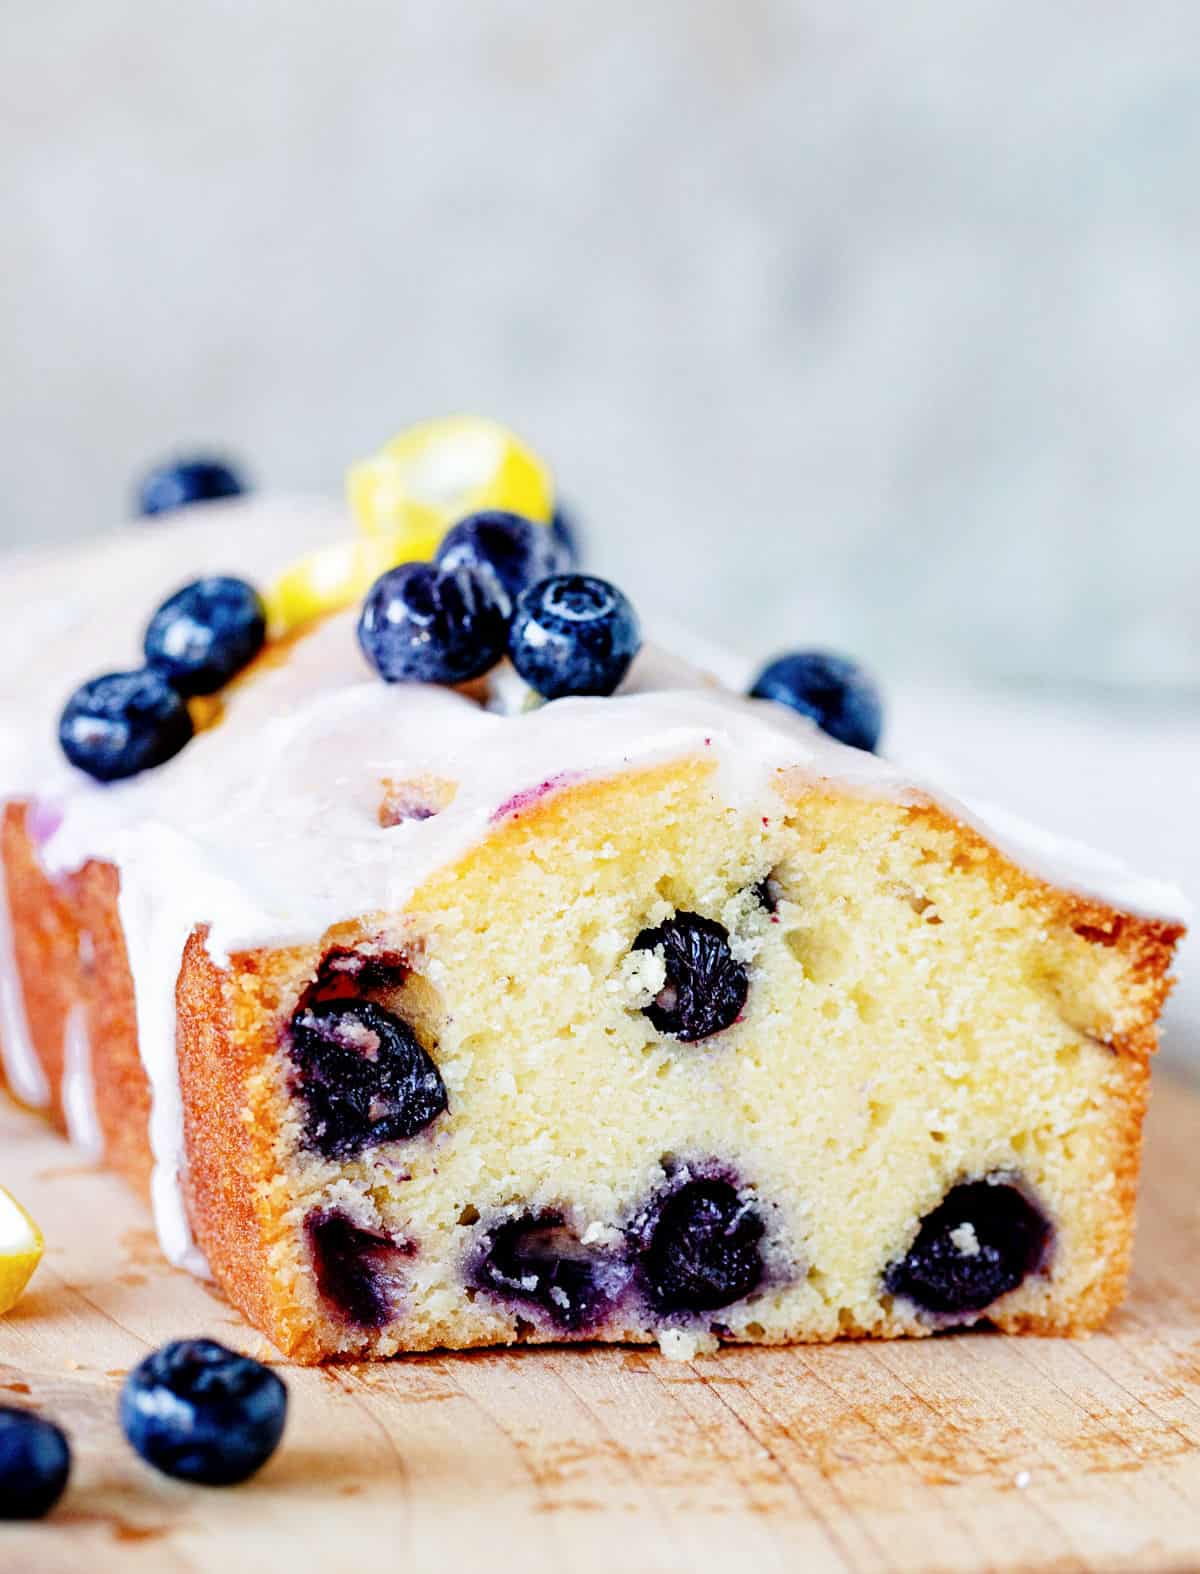 Glazed blueberry pound cake with front cut on wooden board, blueberries around, grey background.